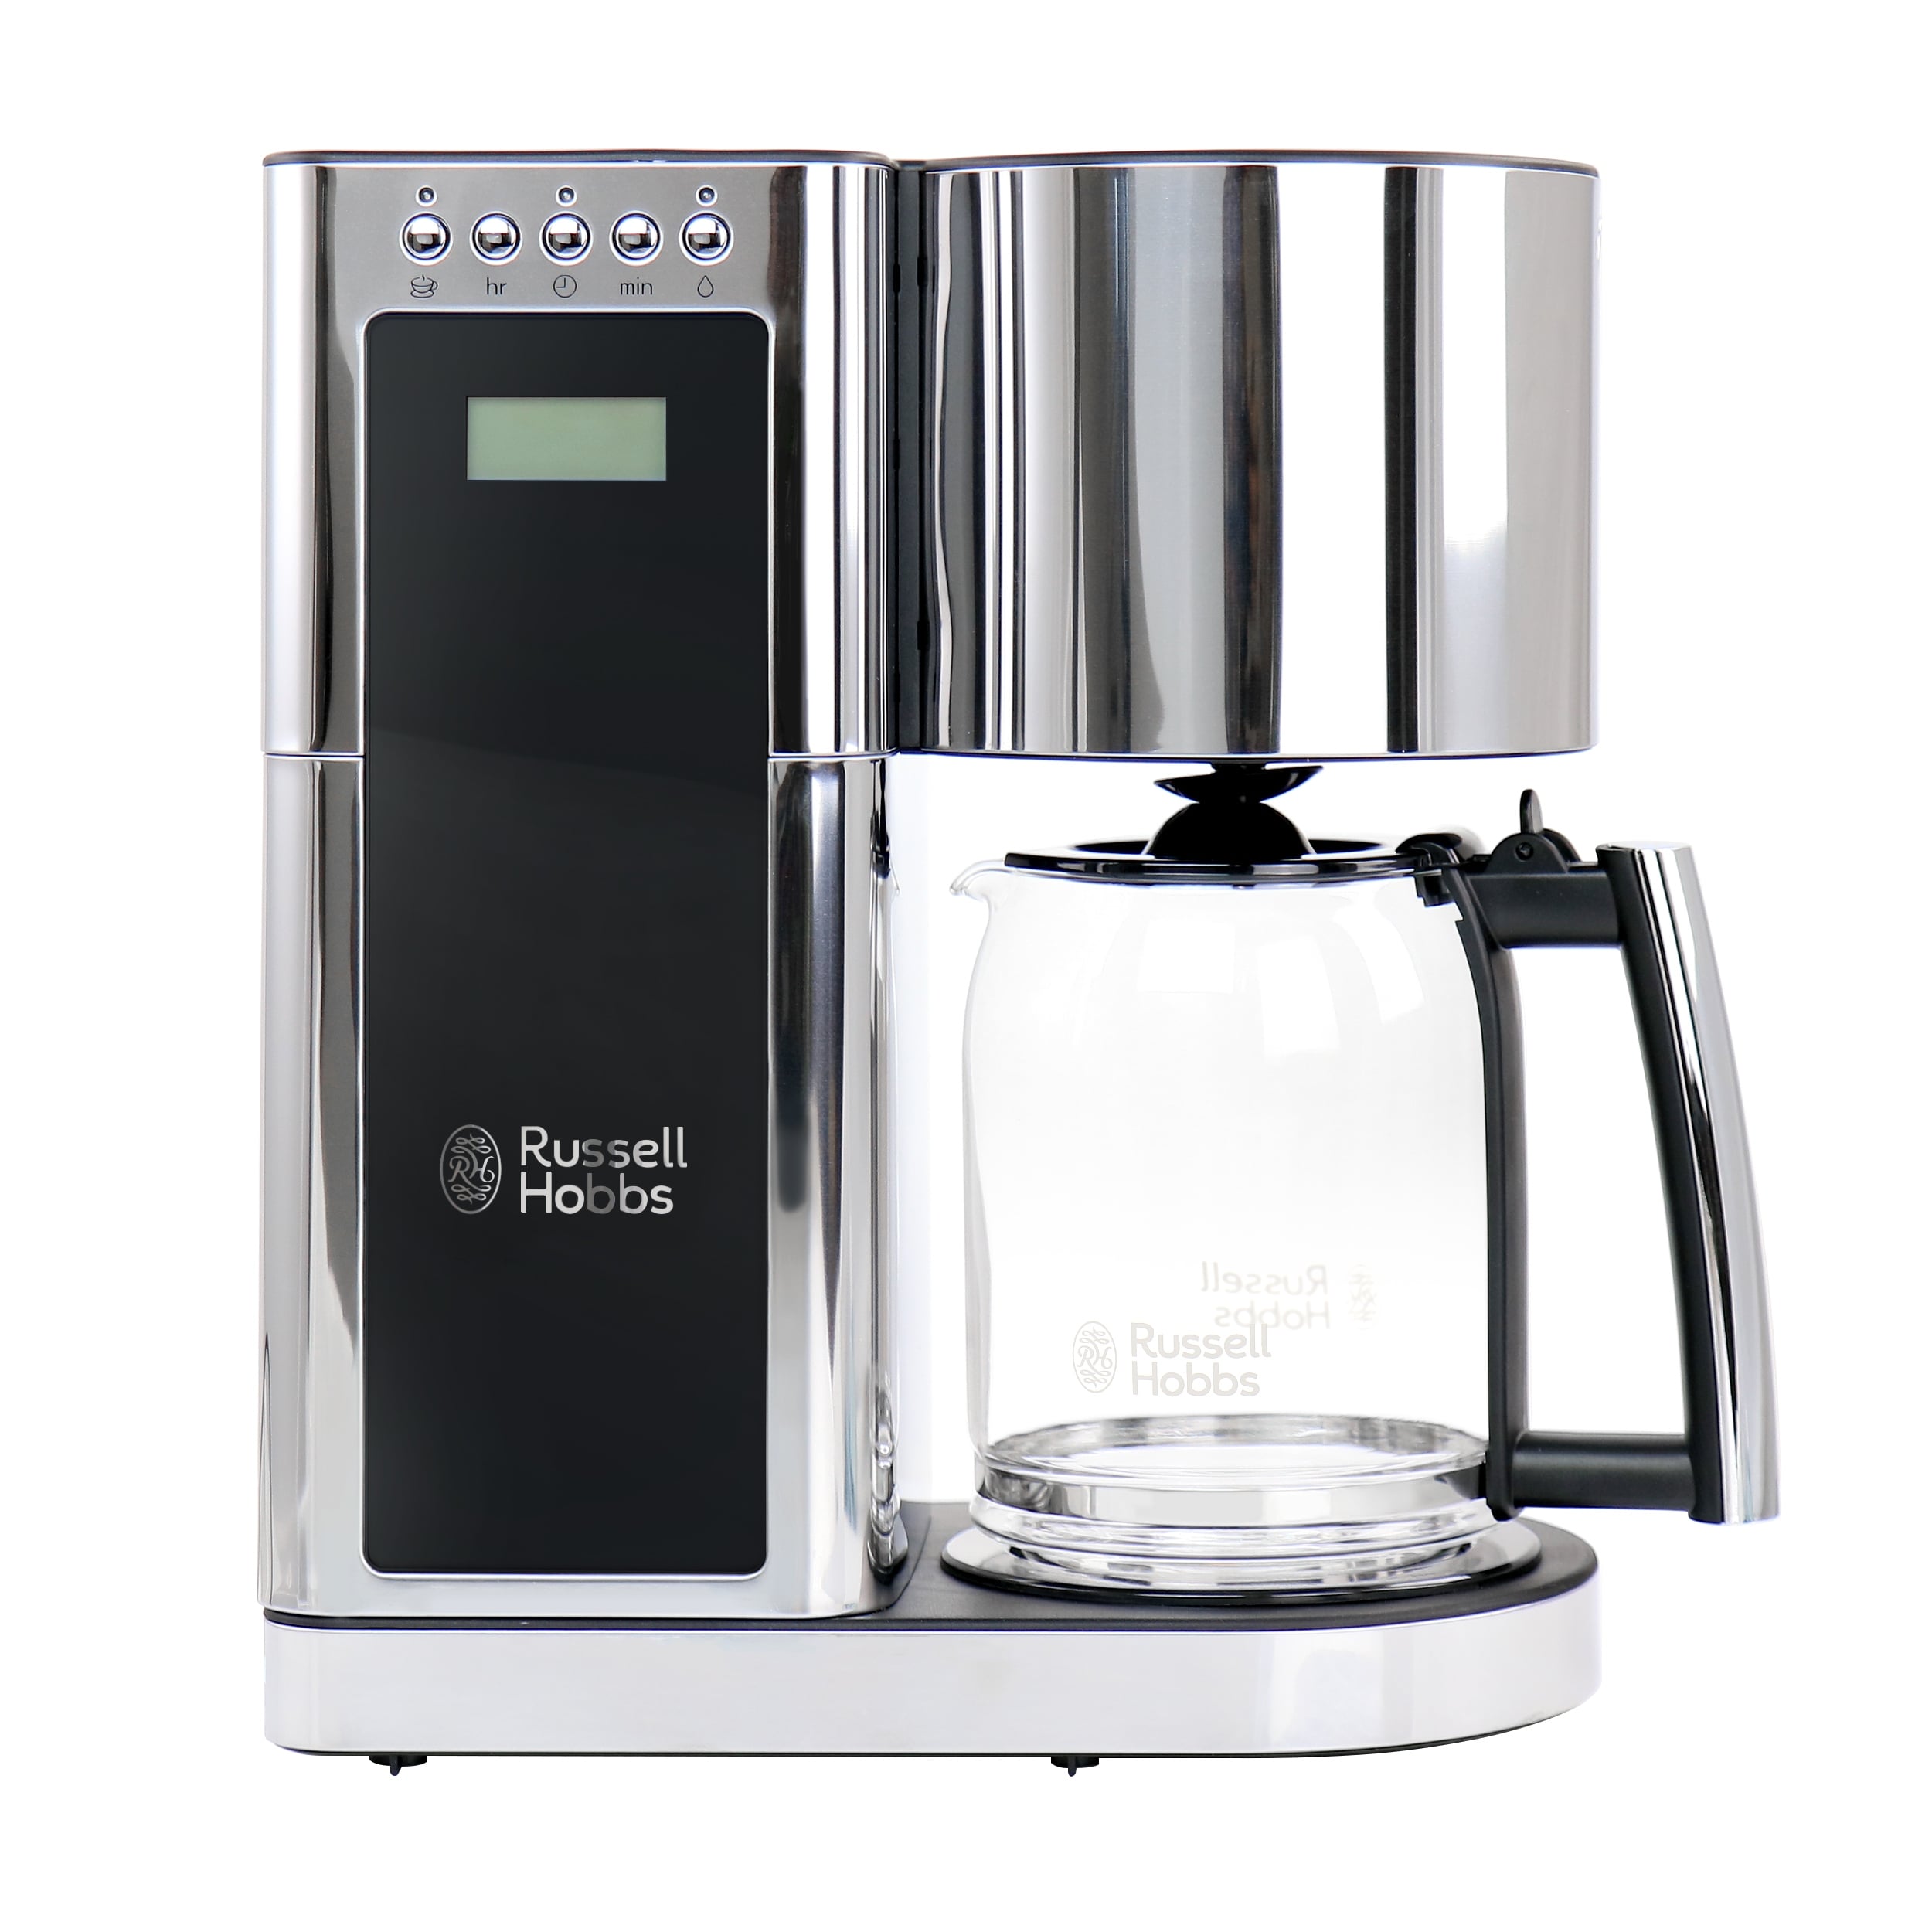 https://ak1.ostkcdn.com/images/products/is/images/direct/612dccb146015dd1f45df01203f428bf9a53f463/Modern-Sleek-Chrome-Glass-Coffeemaker---8-Cup-Brewing-Capacity.jpg